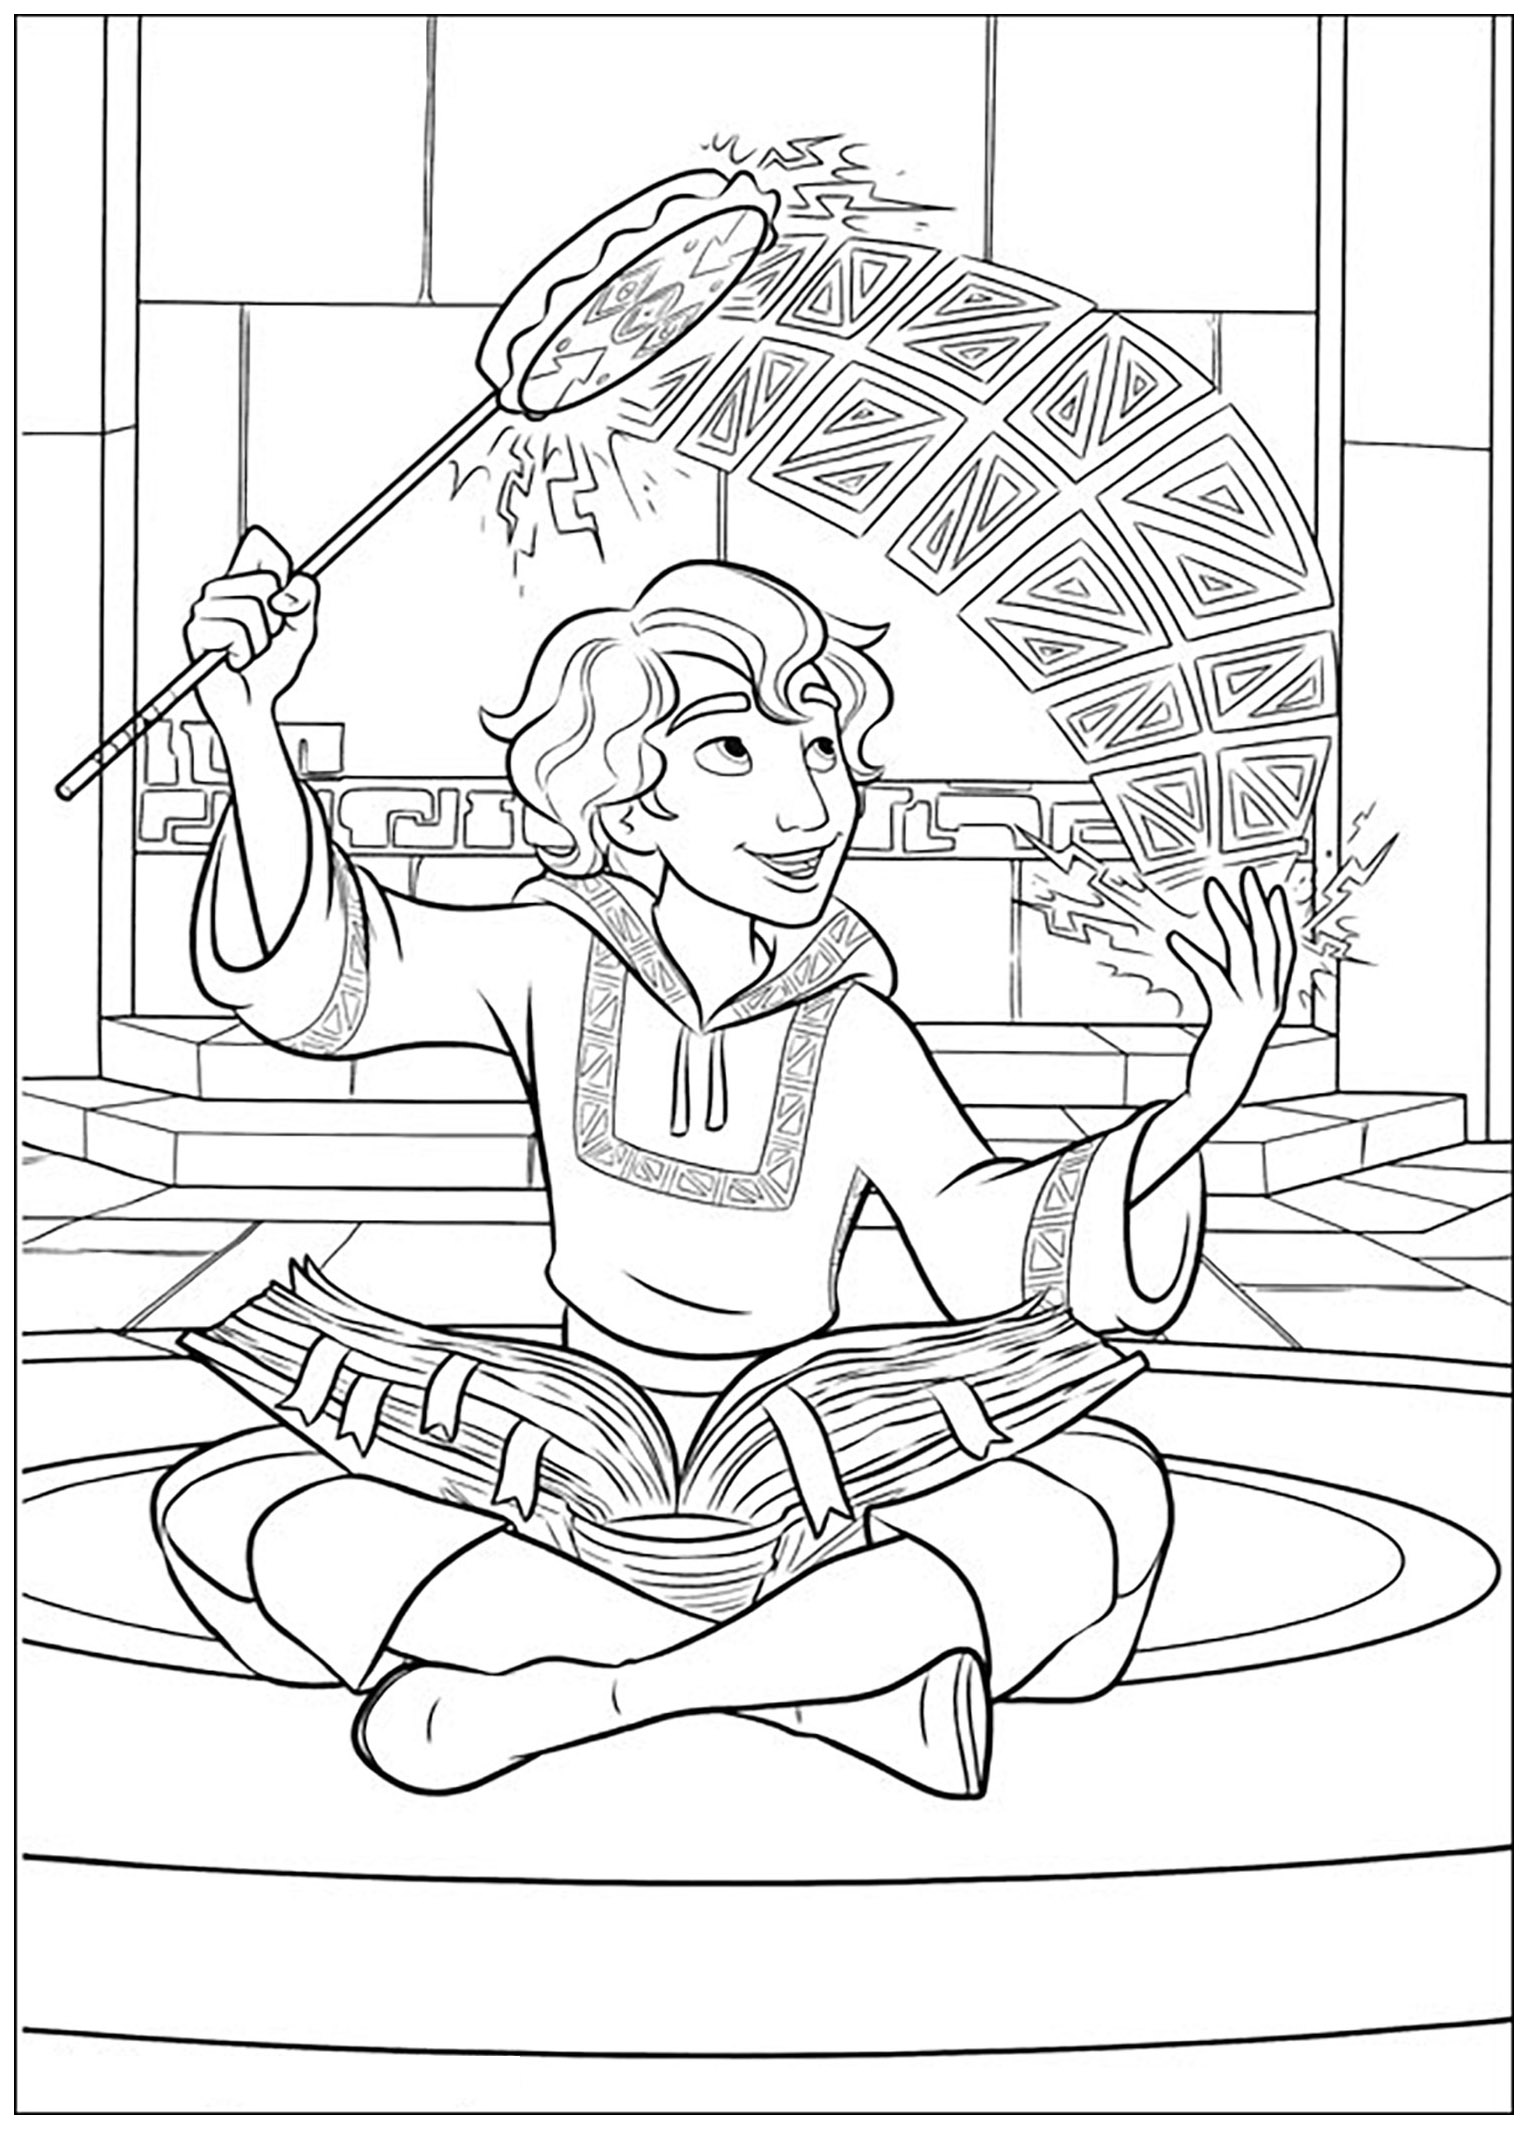 Easy Elena Avalor coloring pages for kids